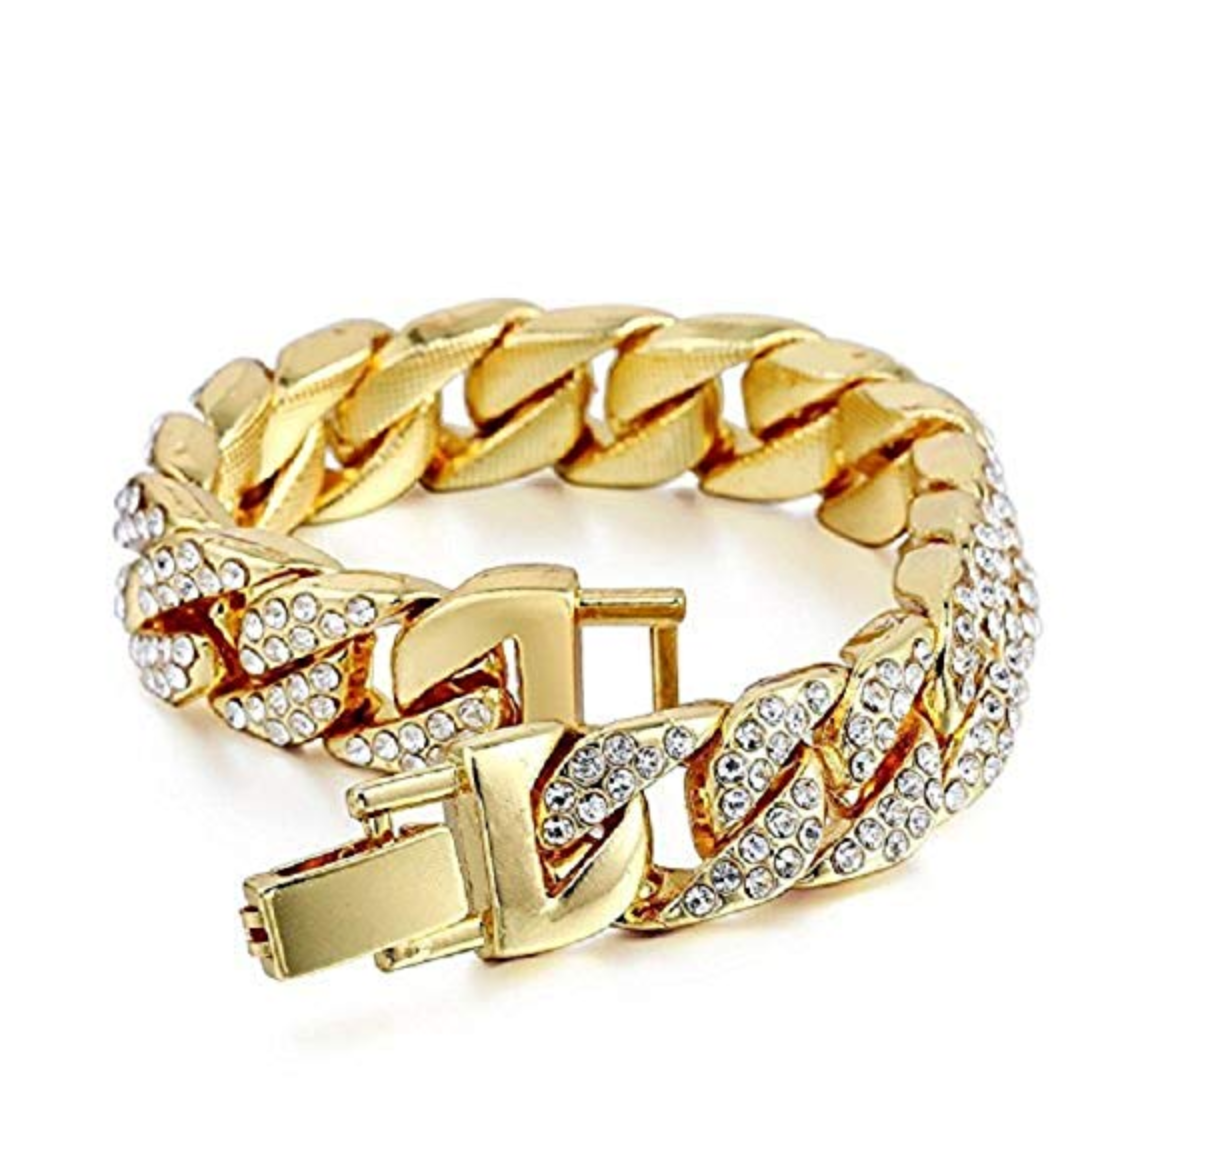 Gold Color Simulated Diamond Luxury Watch Set Hip Hop Cuban Link Bracelet Iced Out Bling Jewelry Bundle